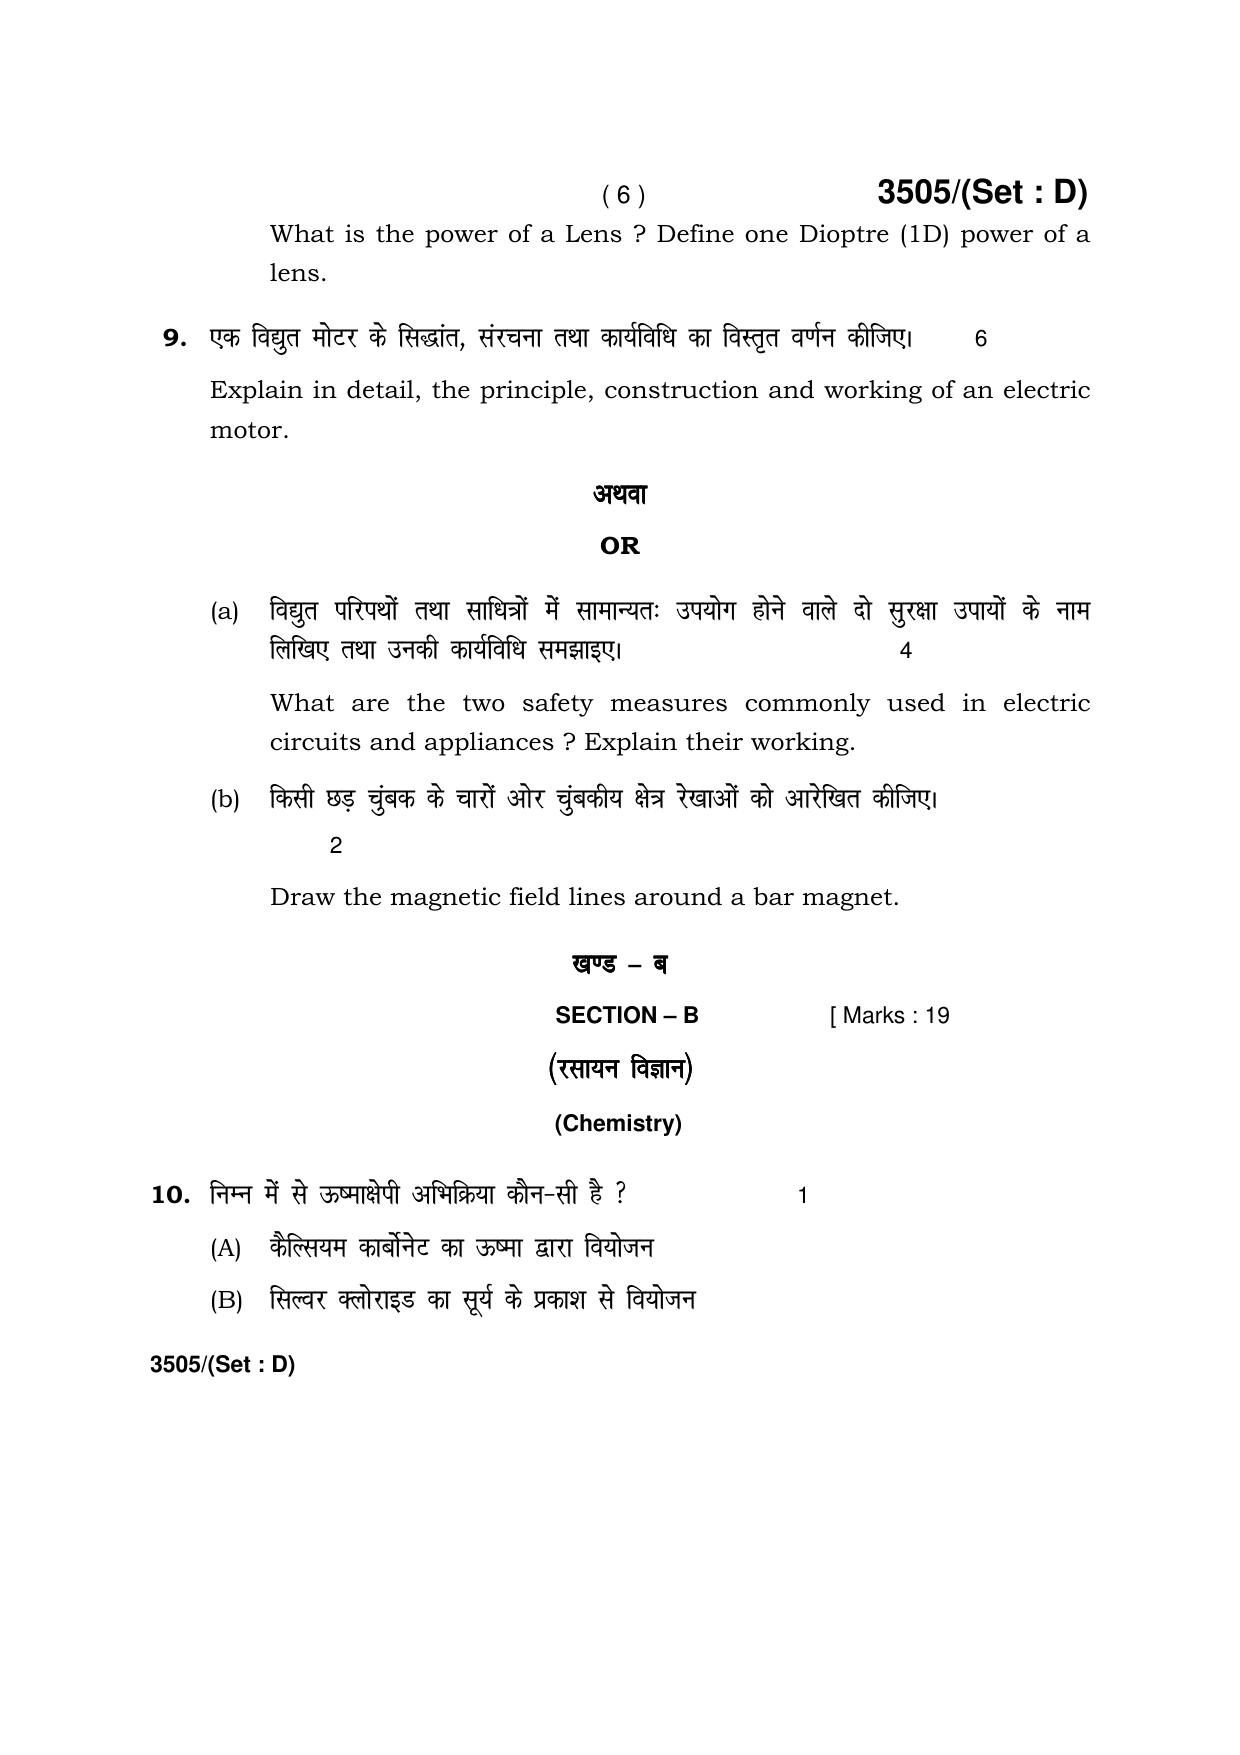 Haryana Board HBSE Class 10 Science -D 2018 Question Paper - Page 6